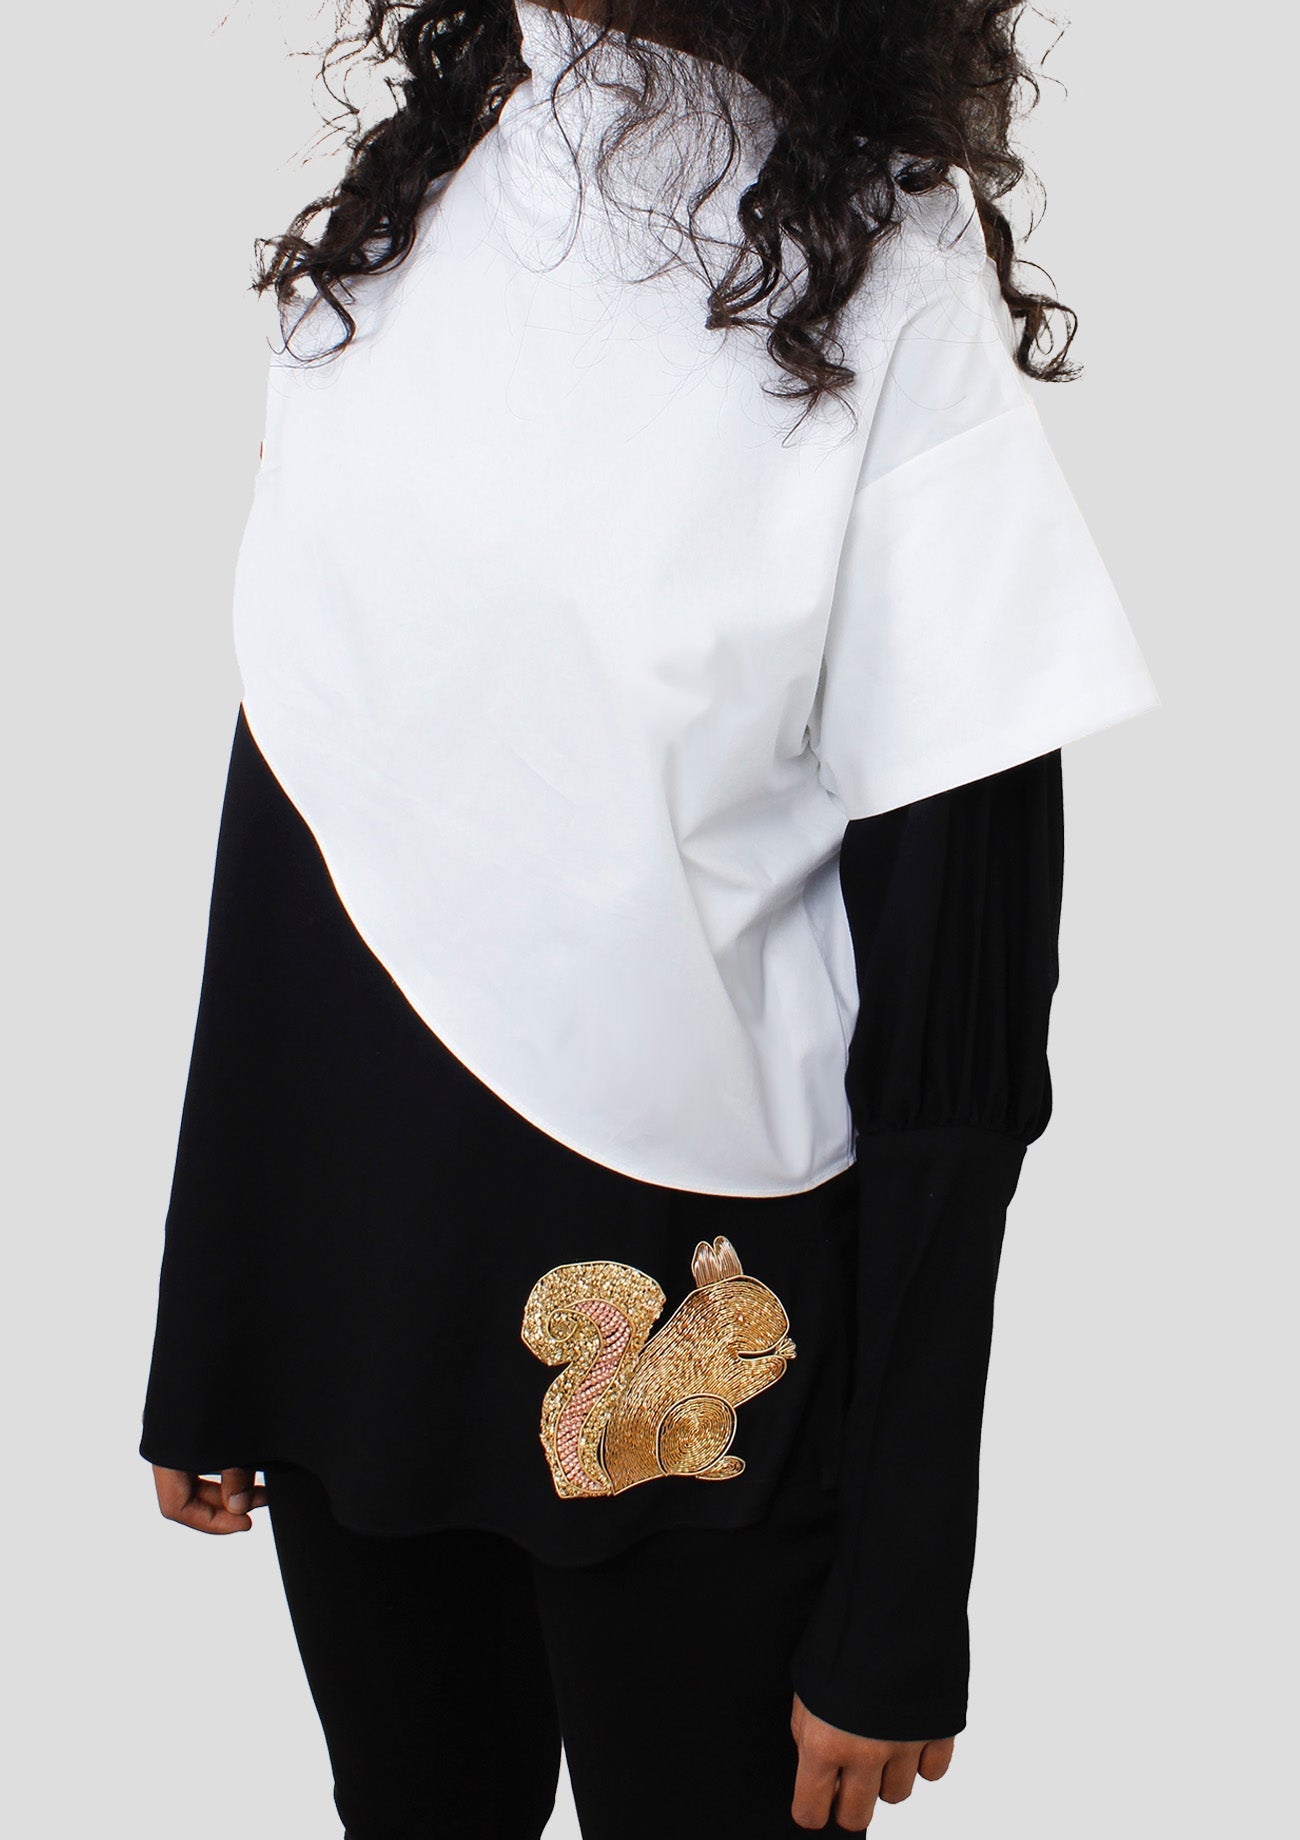 Two Piece Top - Black/White Cotton Top With Embroidererd Squirrel